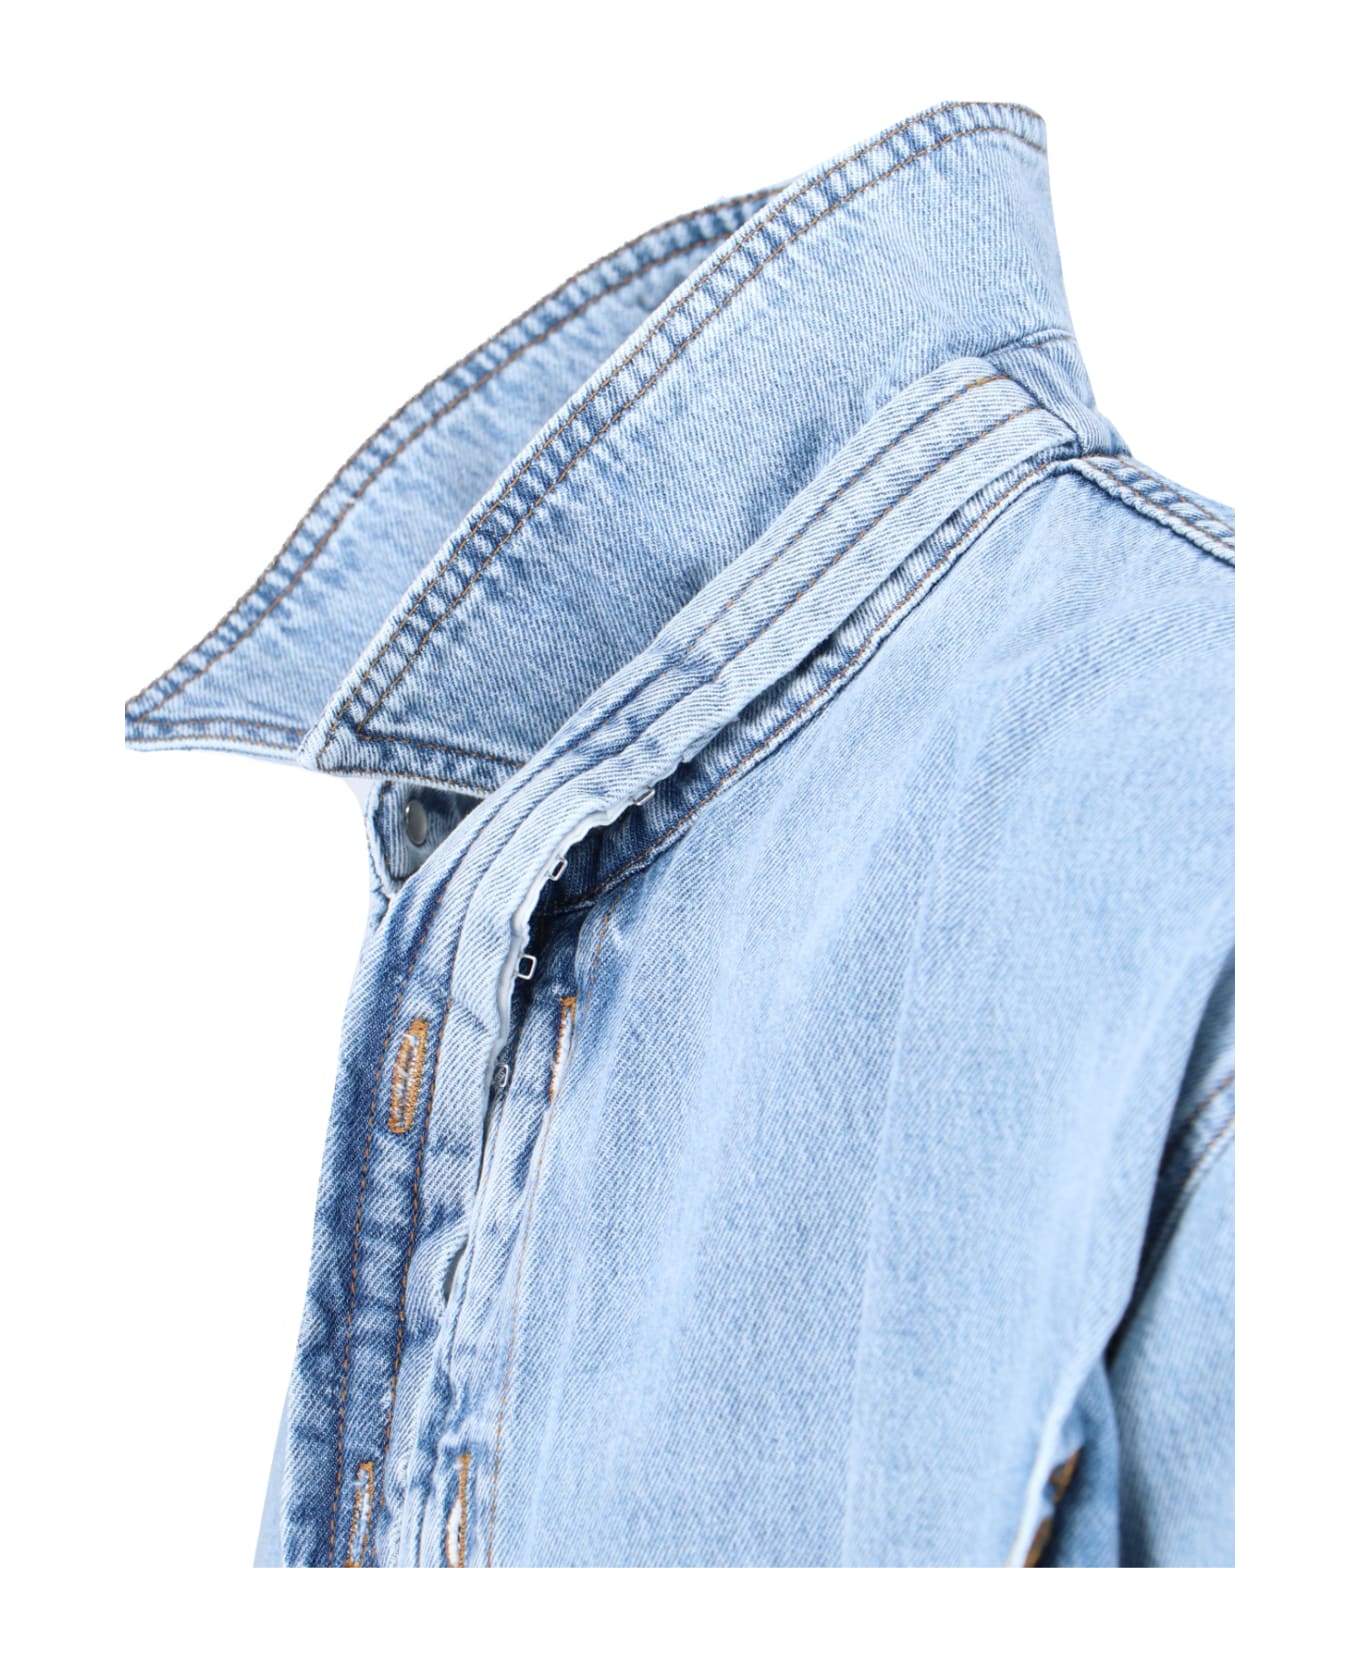 Y/Project 'hook And Eye' Shirt Jacket - Light Blue